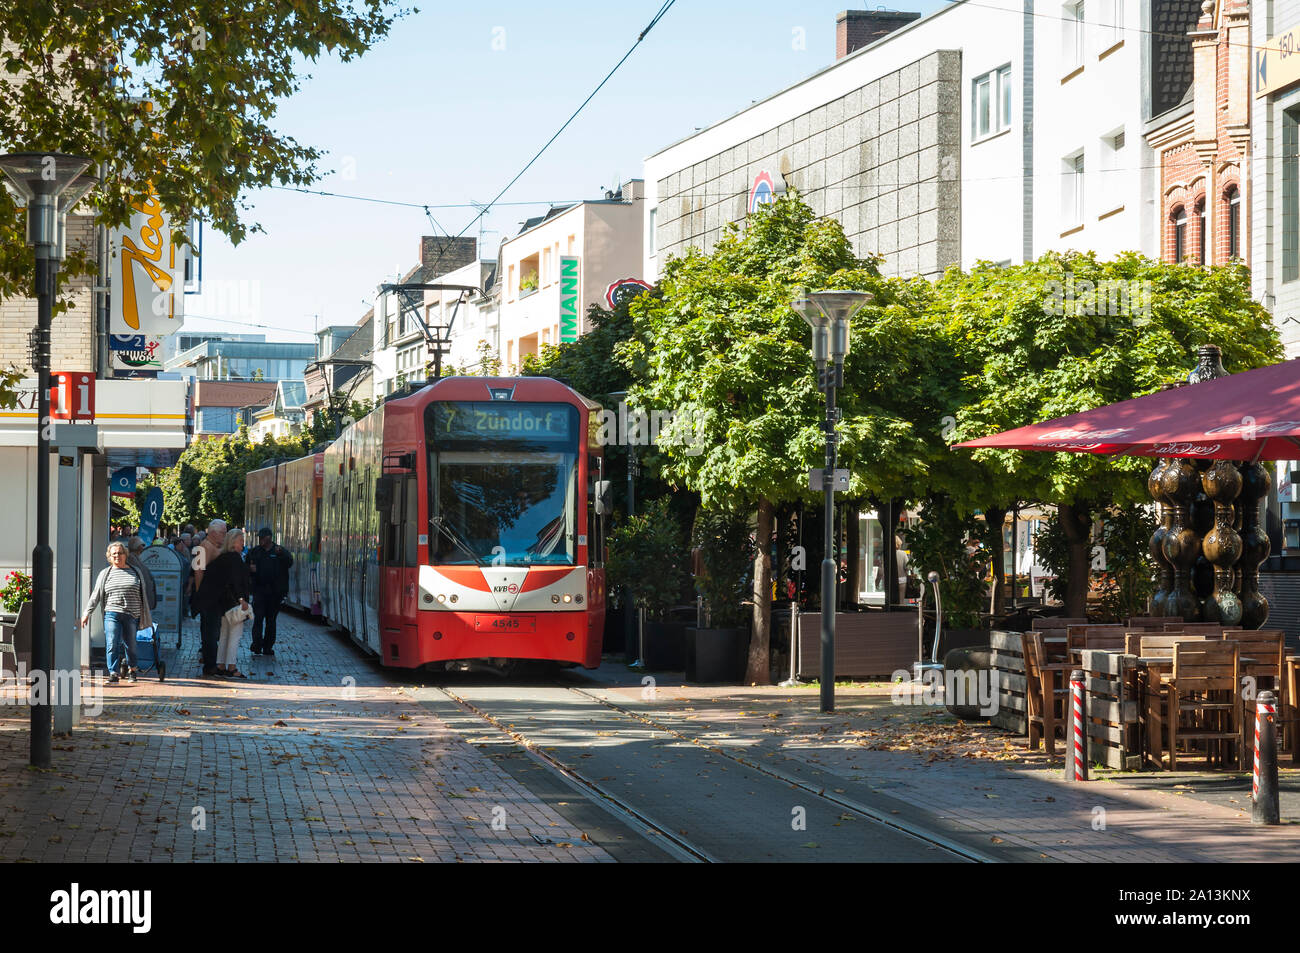 Tram passing through the pedestrian zone in Frechen, near Cologne, NRW, Germany Stock Photo